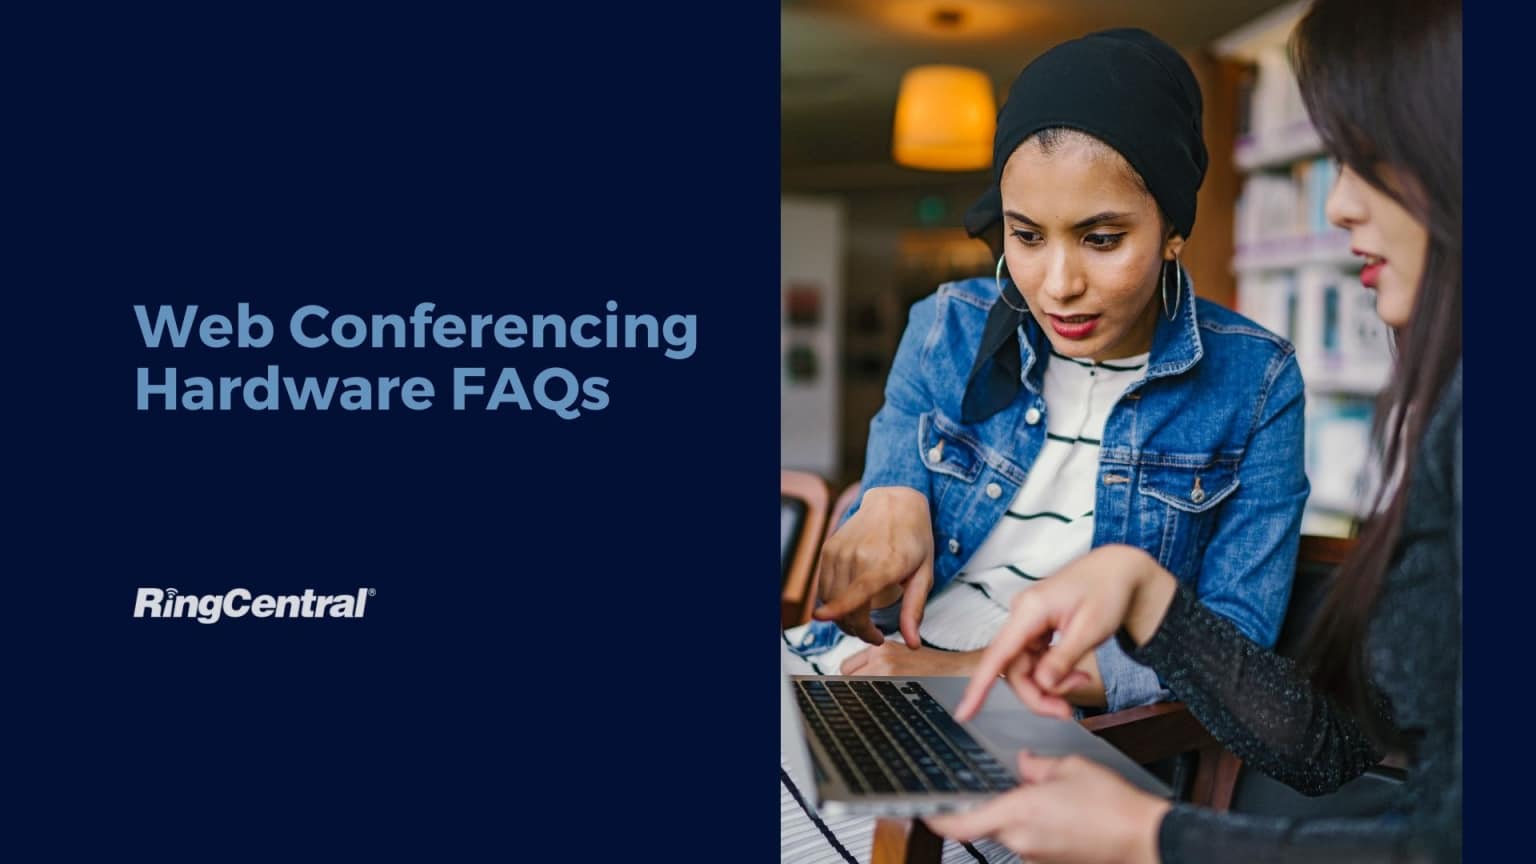 Web Conferencing Hardware FAQs